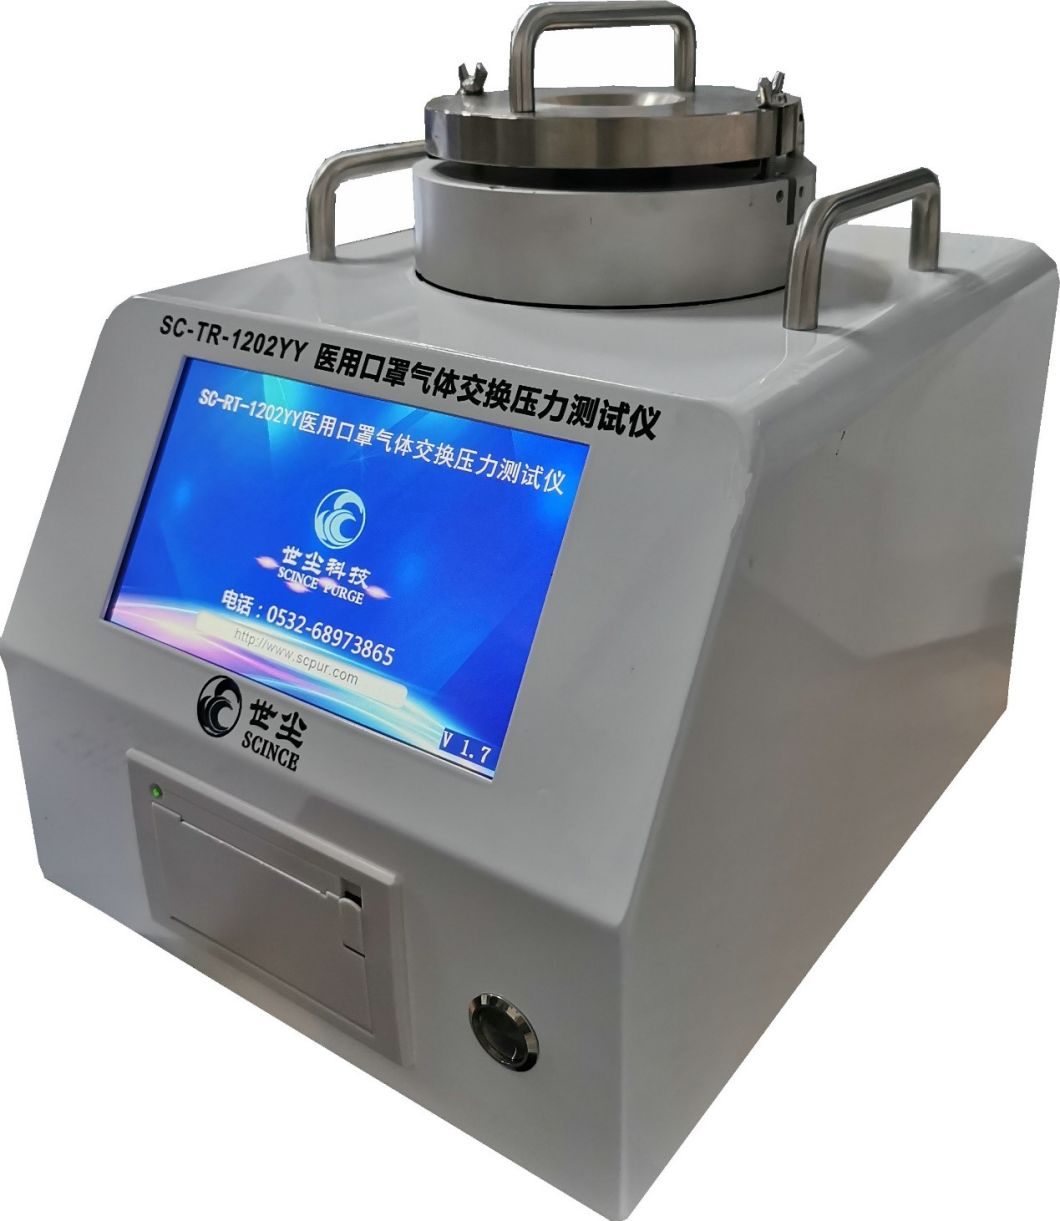 Mask Differential Pressure Tester for Medical Face Mask (SC-RT-1202YY)